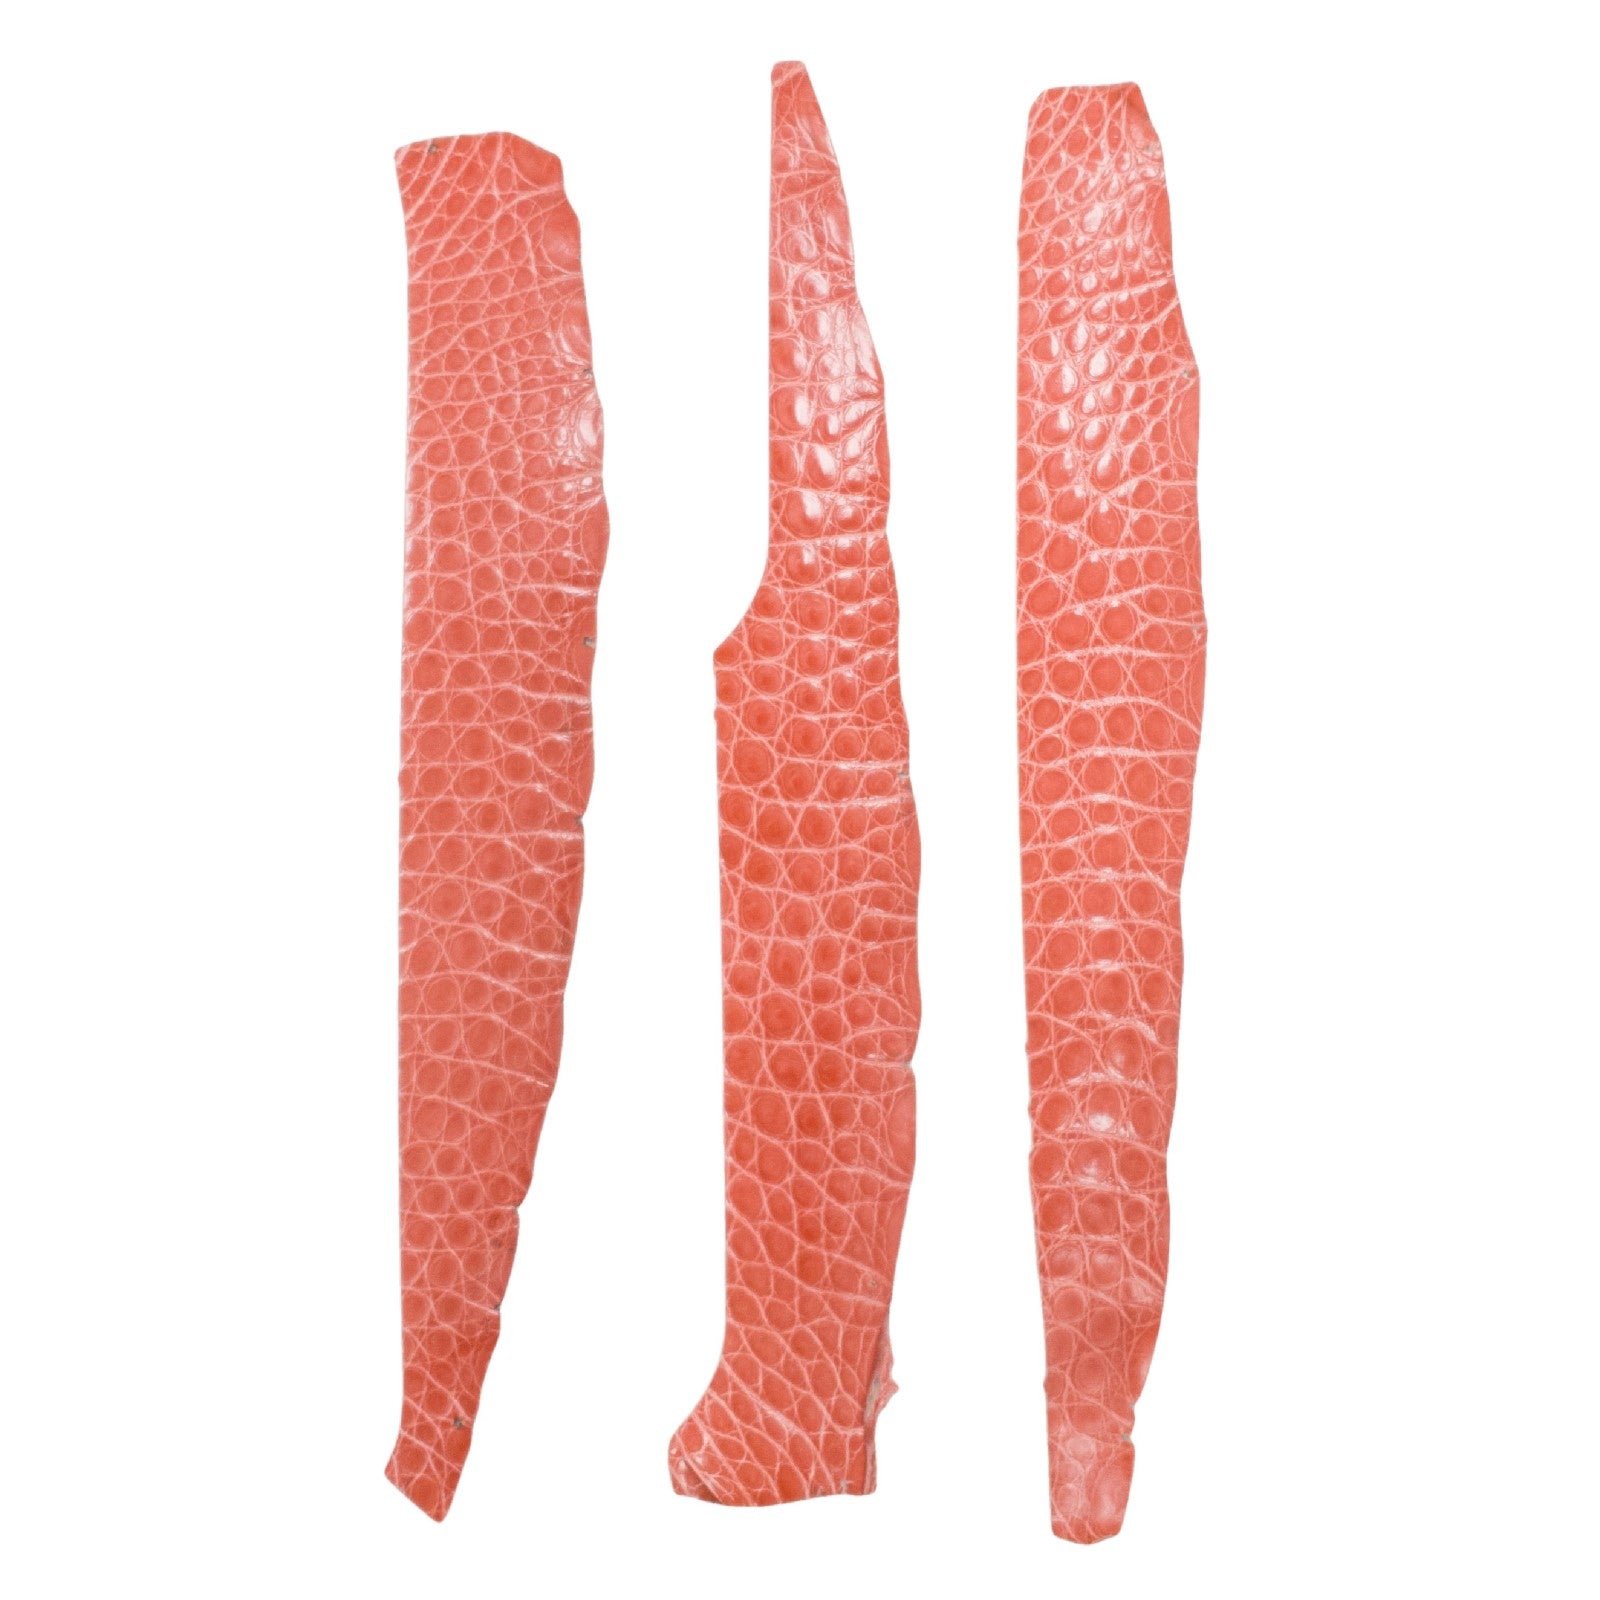 Alligator Skin Pieces Various Colors Genuine Hide, Peach / Strap 2 | The Leather Guy